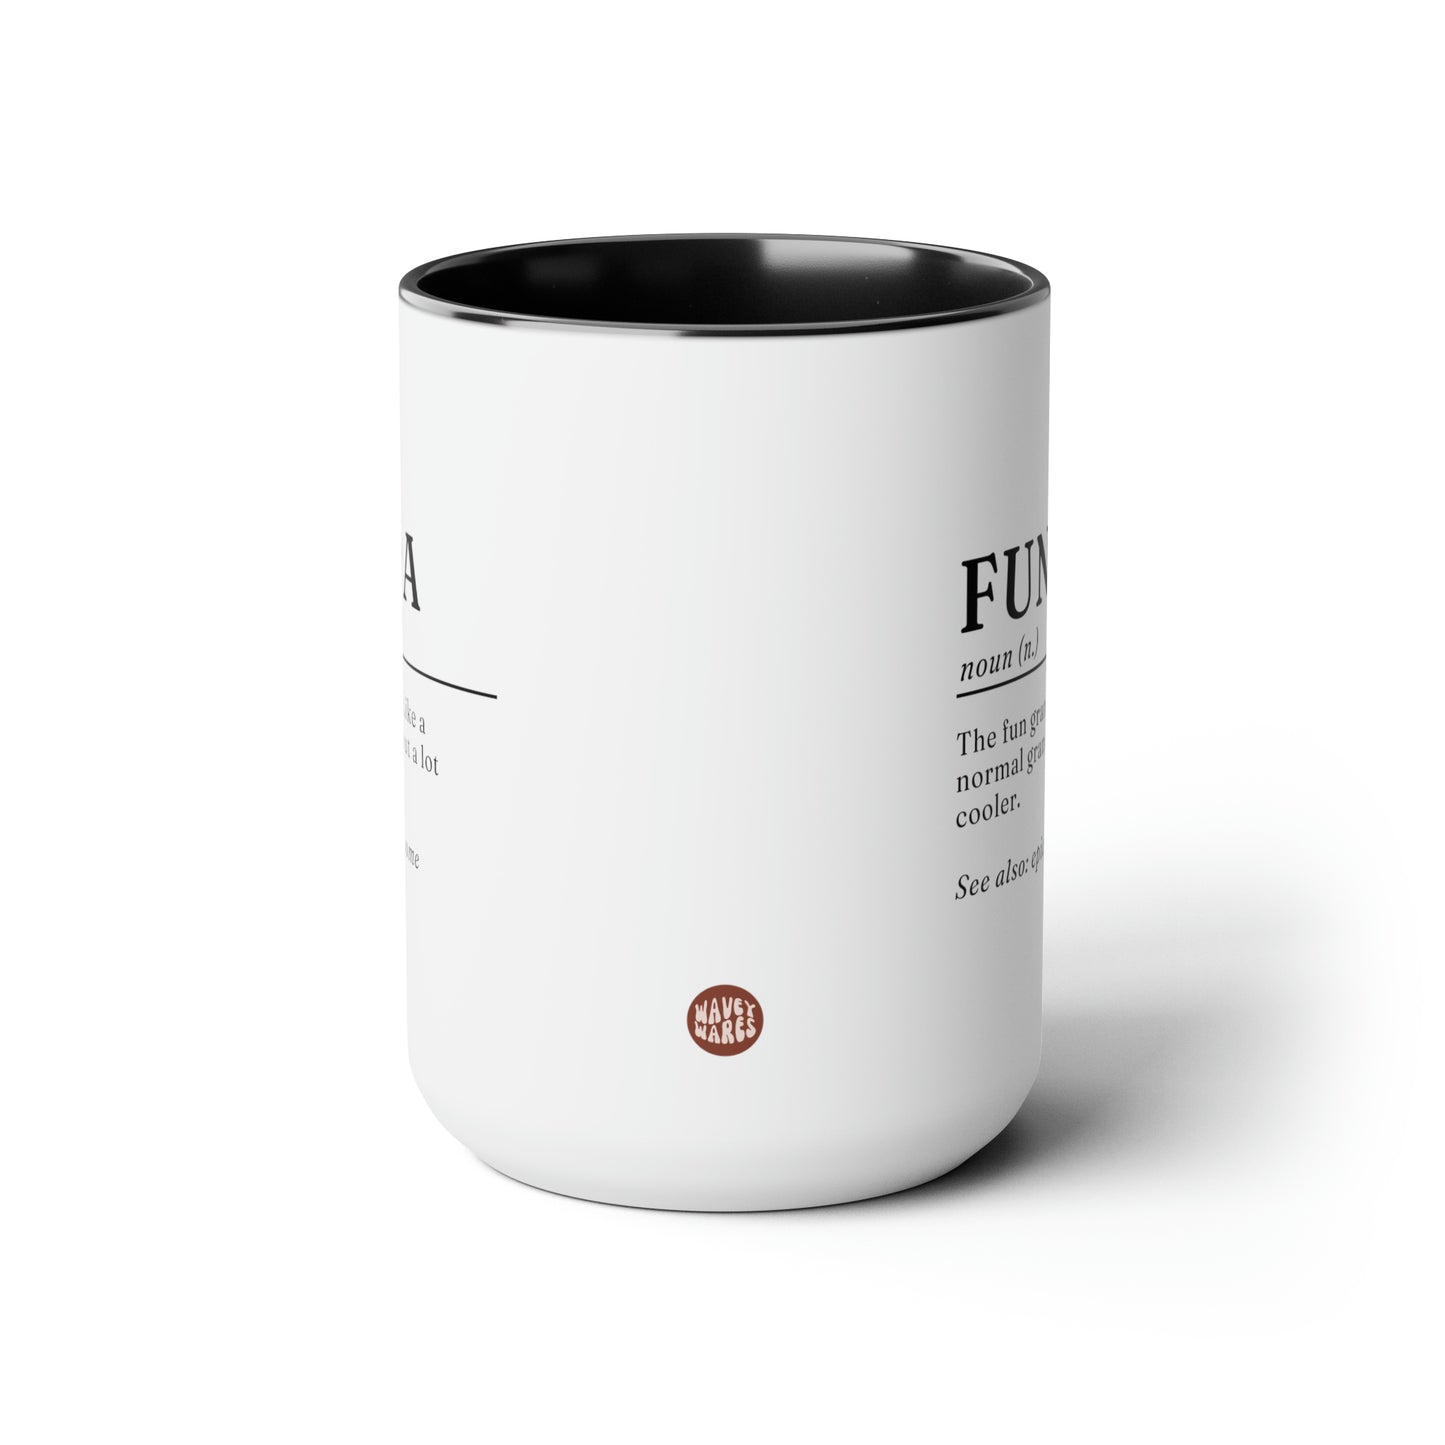 Funpa definition 15oz white with black accent funny large coffee mug gift for grandpa grandfather grandad pops custom pop personalized waveywares wavey wares wavywares wavy wares side